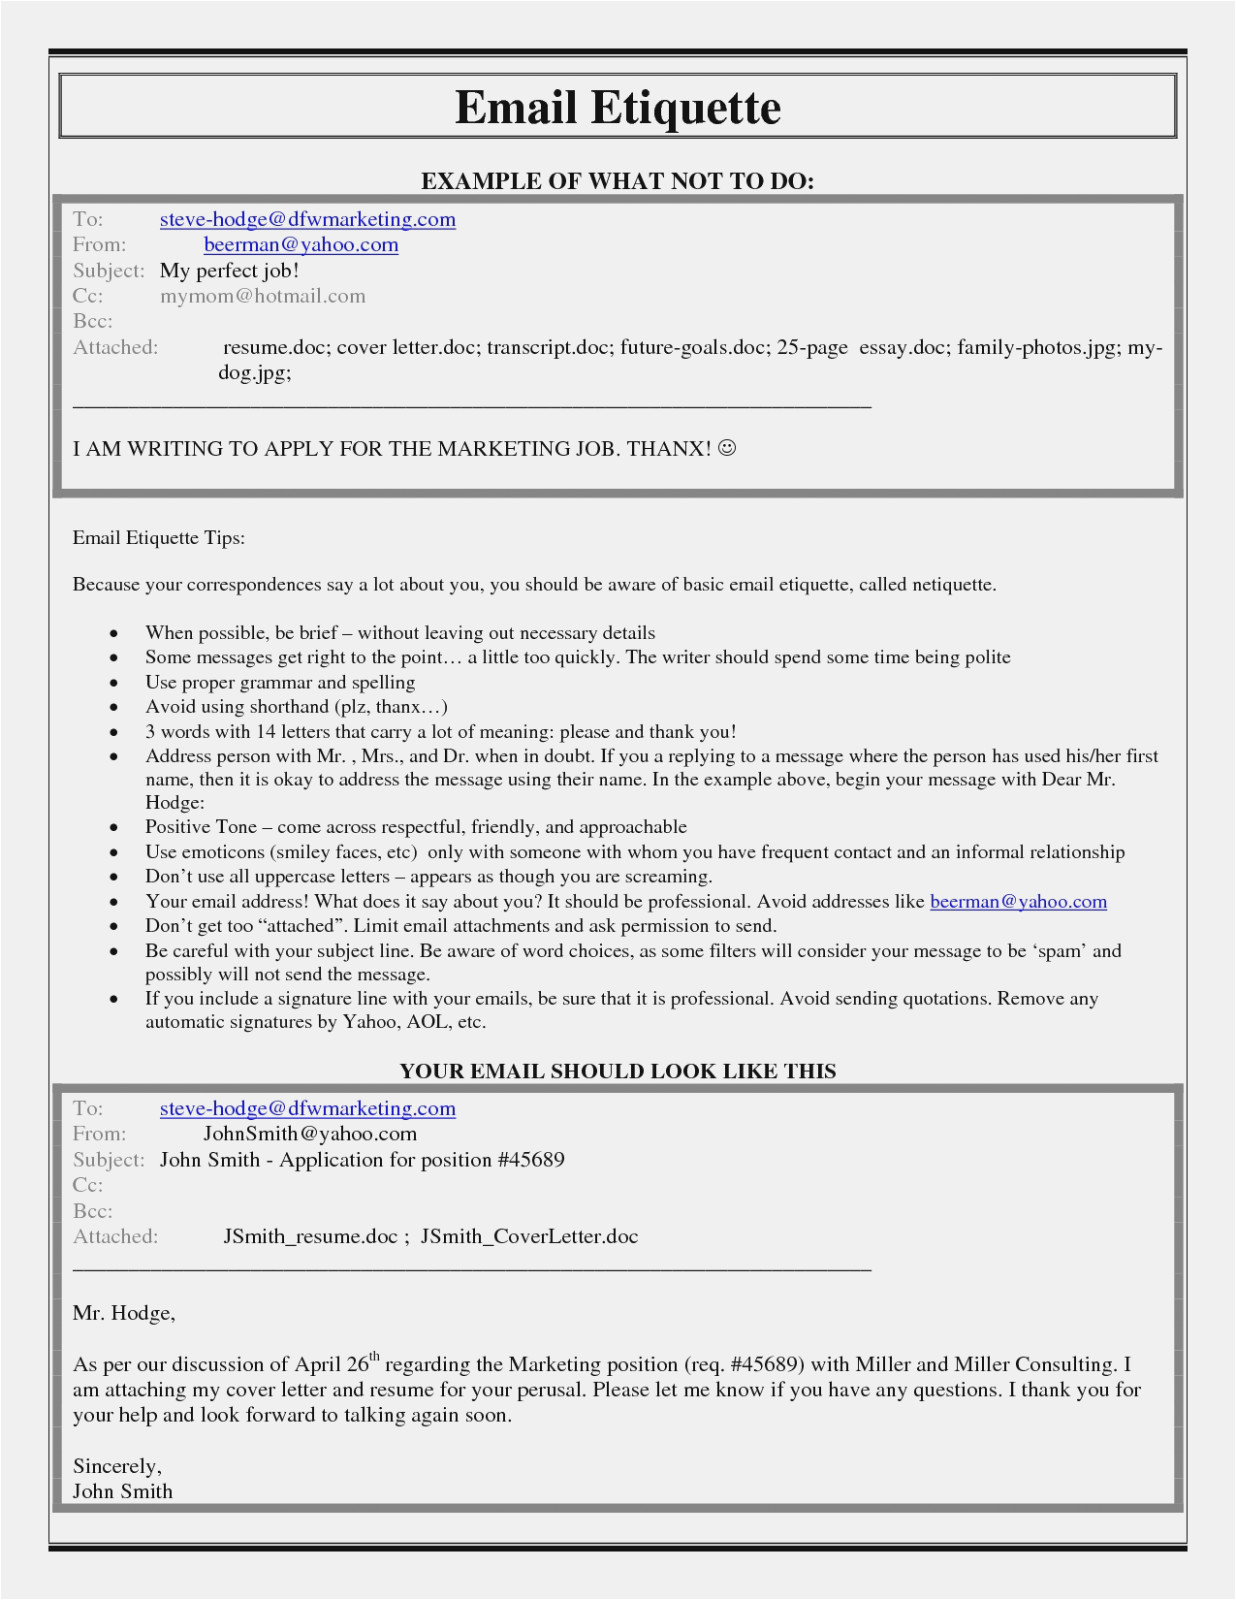 Sample Of Sending Resume by Email 14 Ways How to Get the Most From This Sending Resume